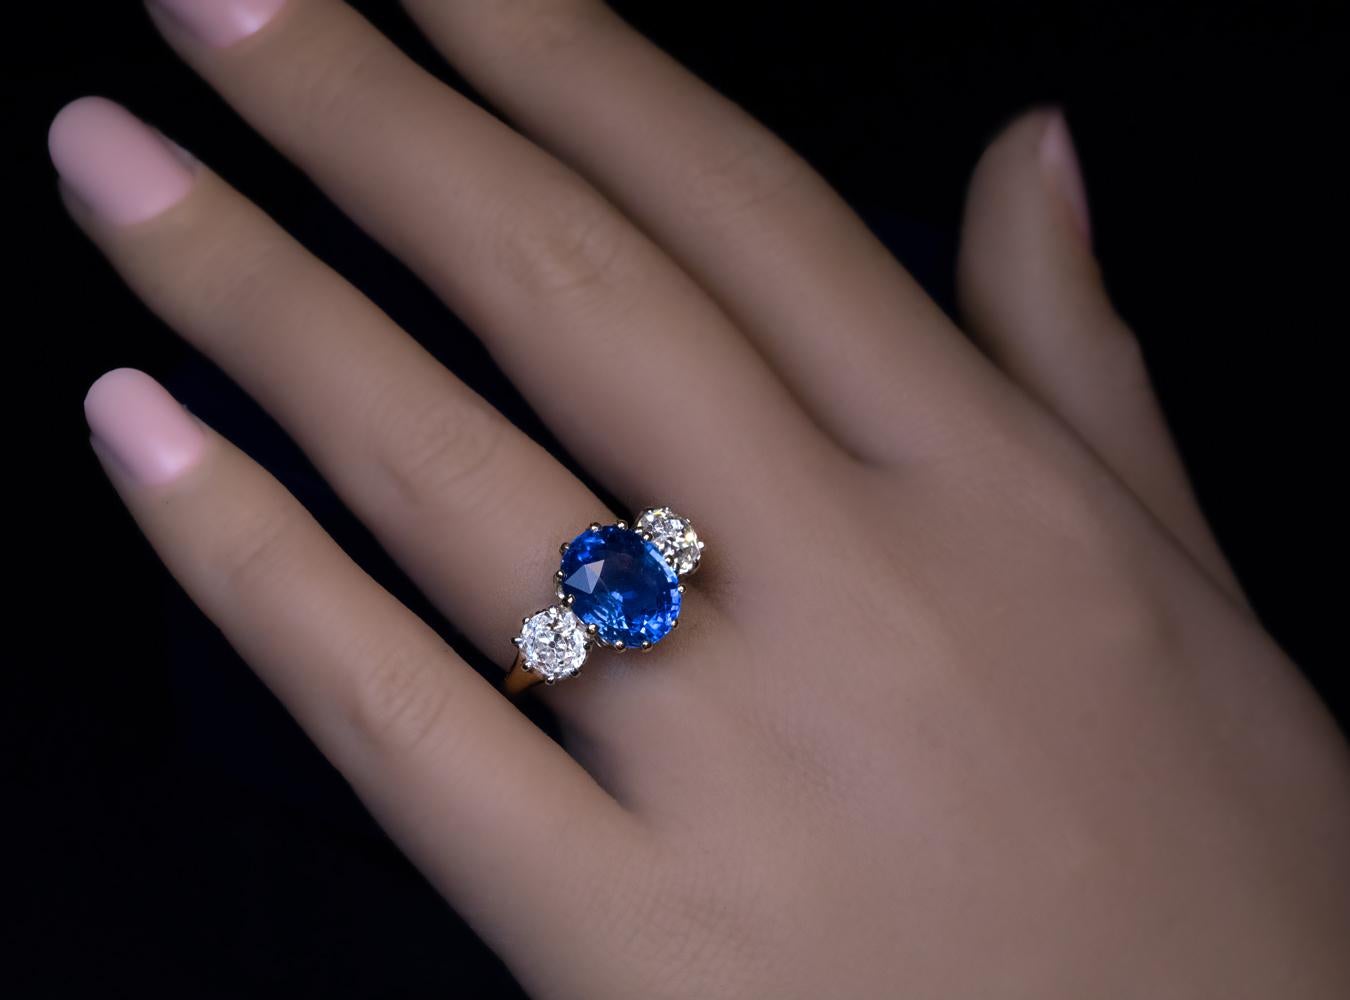 This classic three-stone engagement ring is crafted in 18K gold and platinum. The ring features an excellent natural unheated blue sapphire from Ceylon. The sapphire is flanked by two chunky pre-1900 old mine cut diamonds (I-J color, VS1